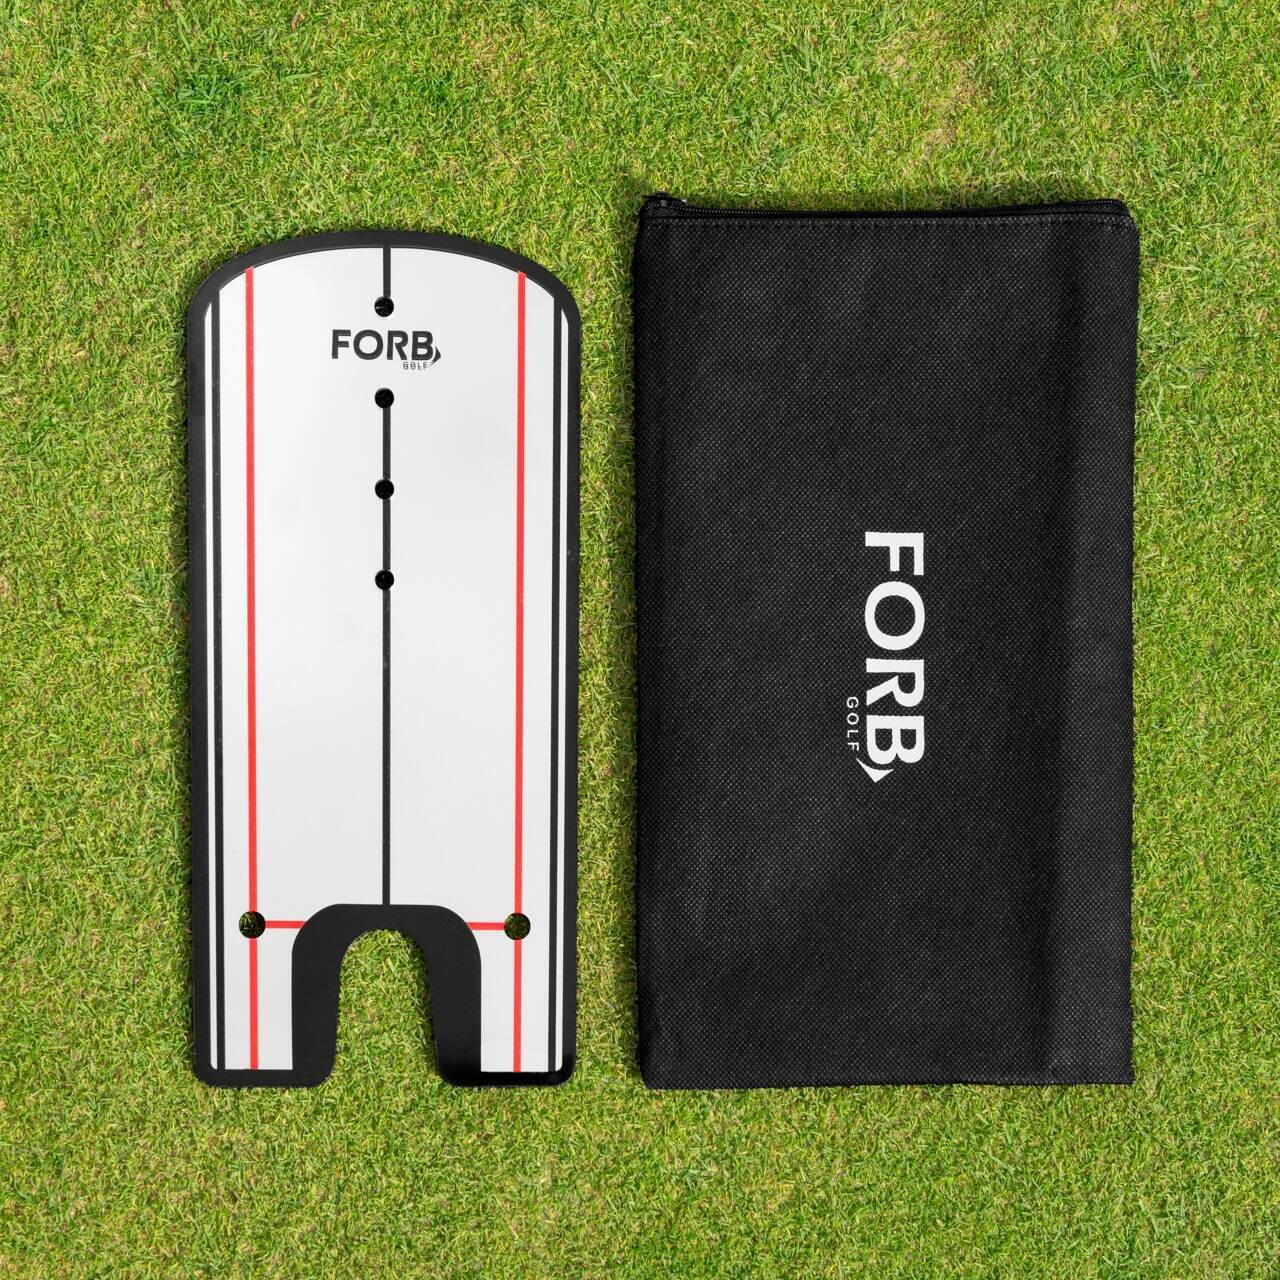 FORB Golf Putting Alignment Mirror